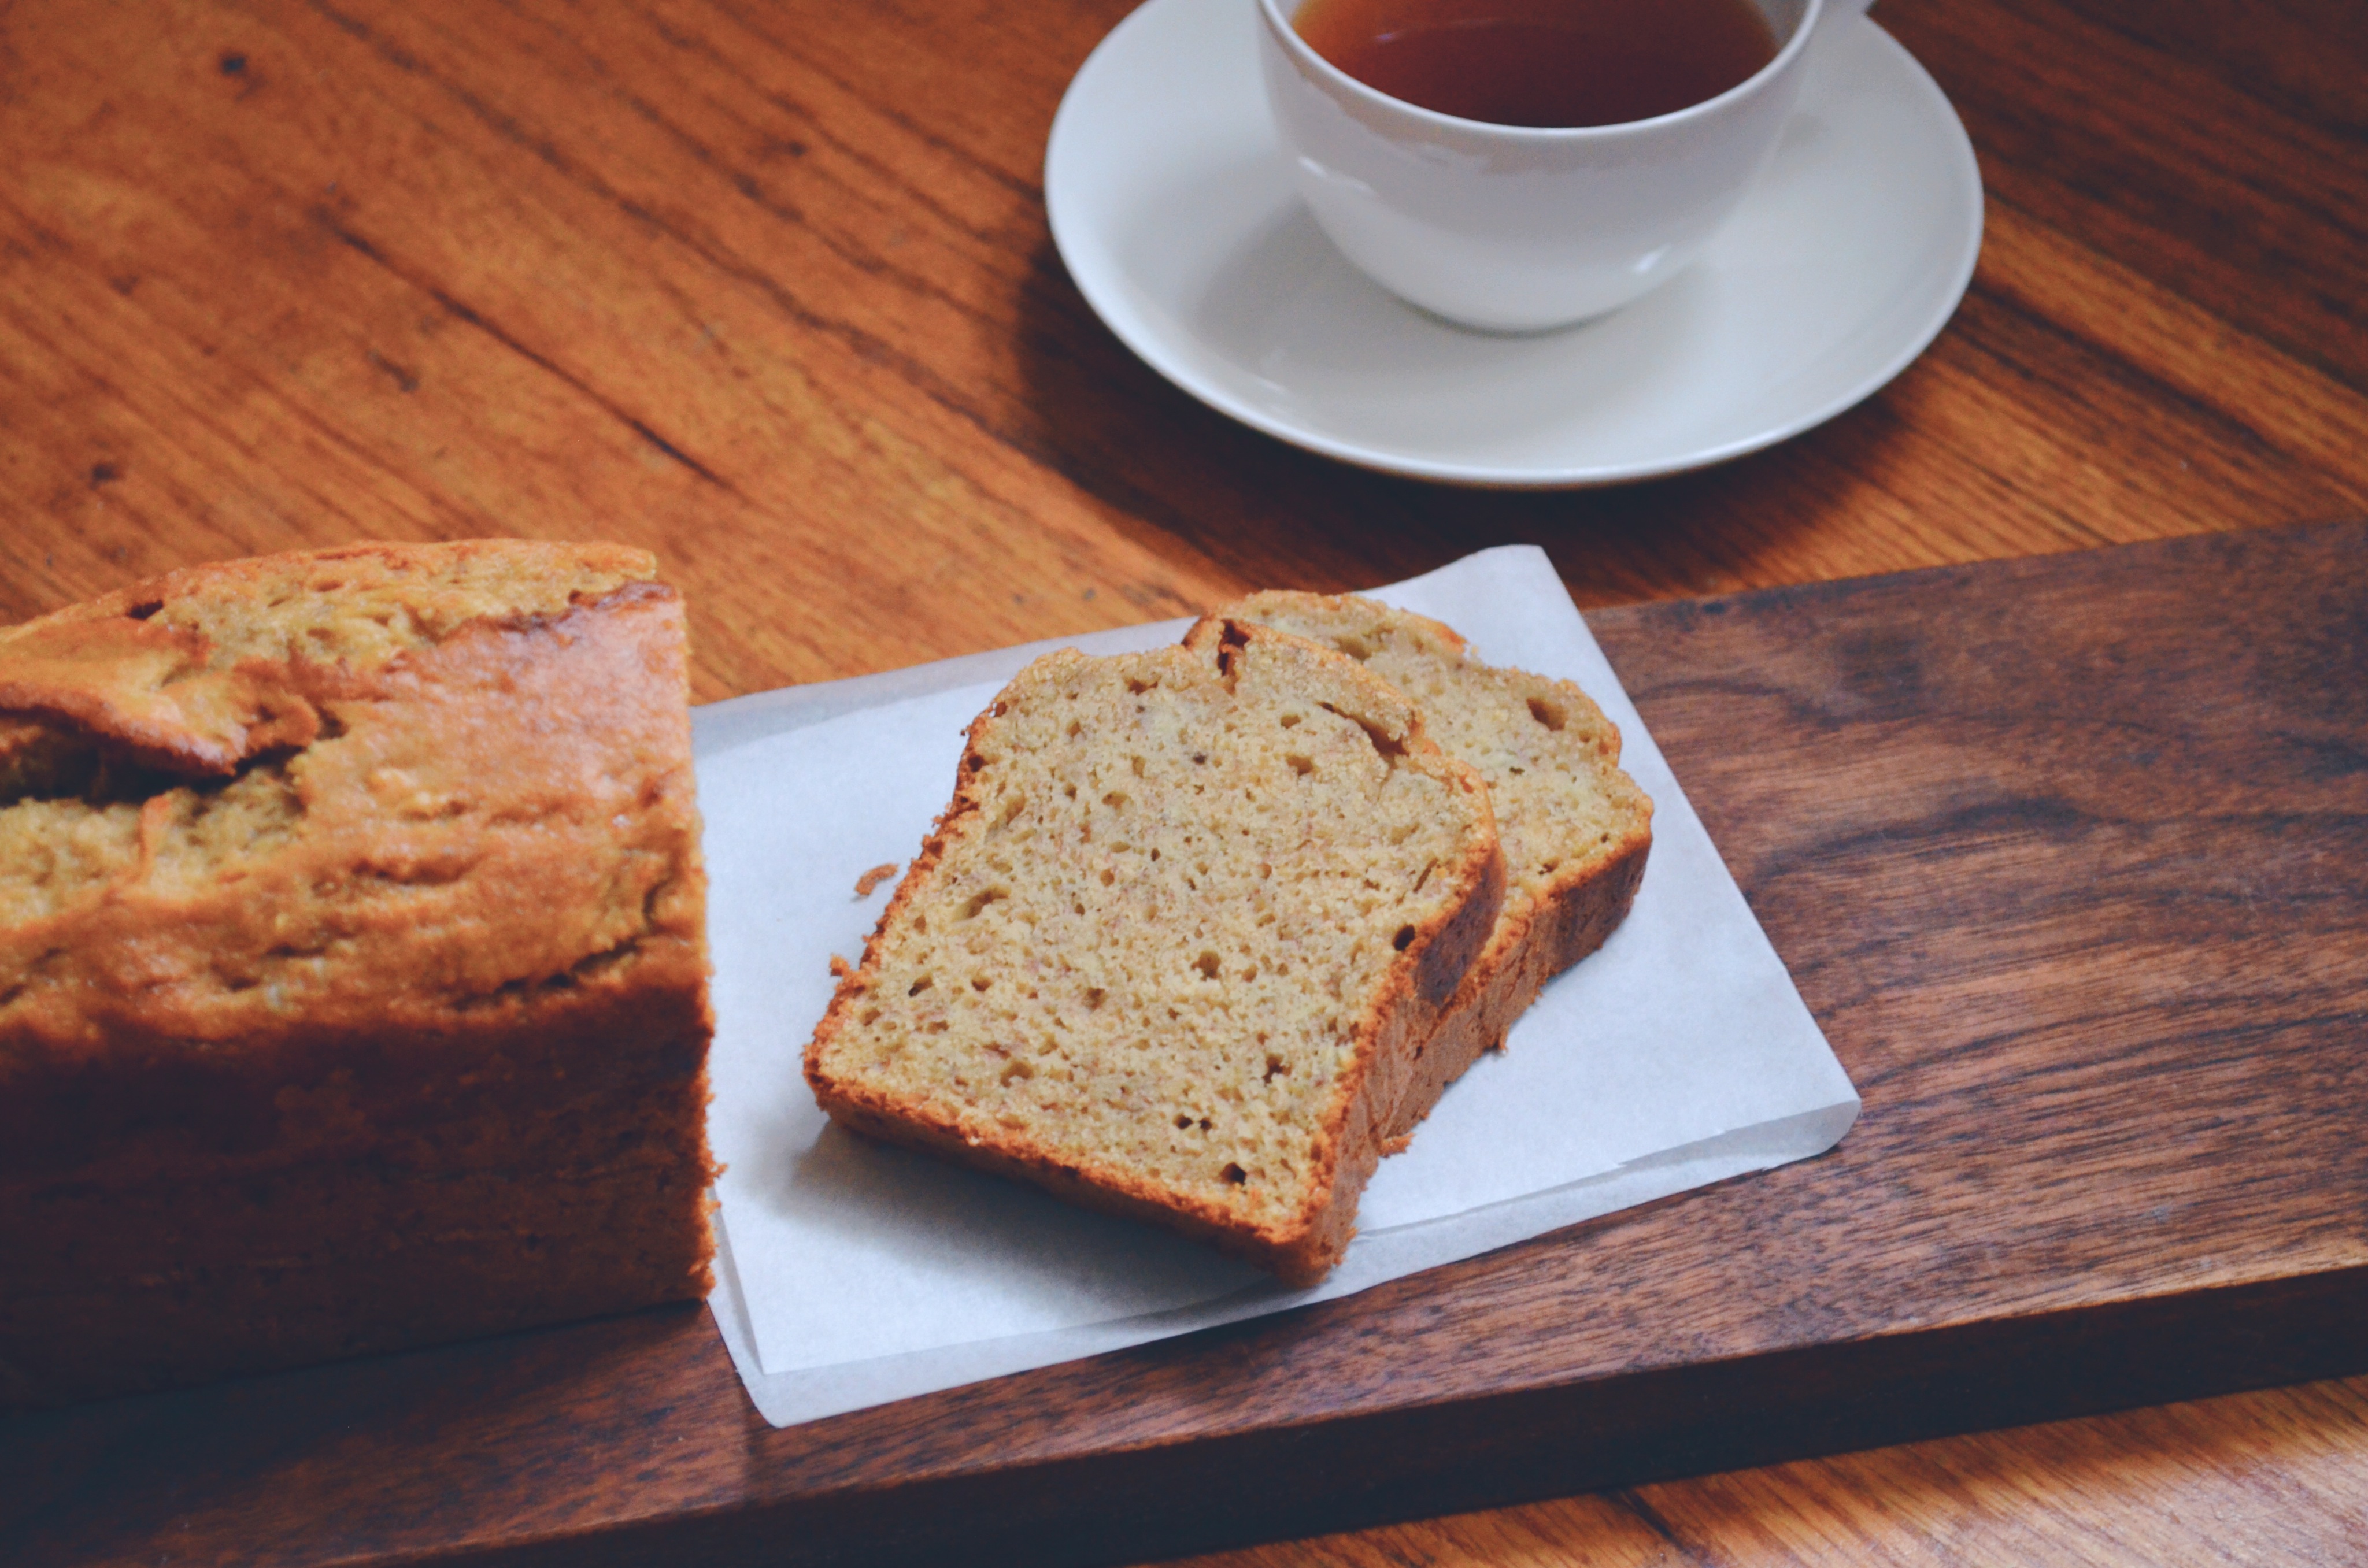 Banana bread wrapped in a tea towel – Stock photos from around the